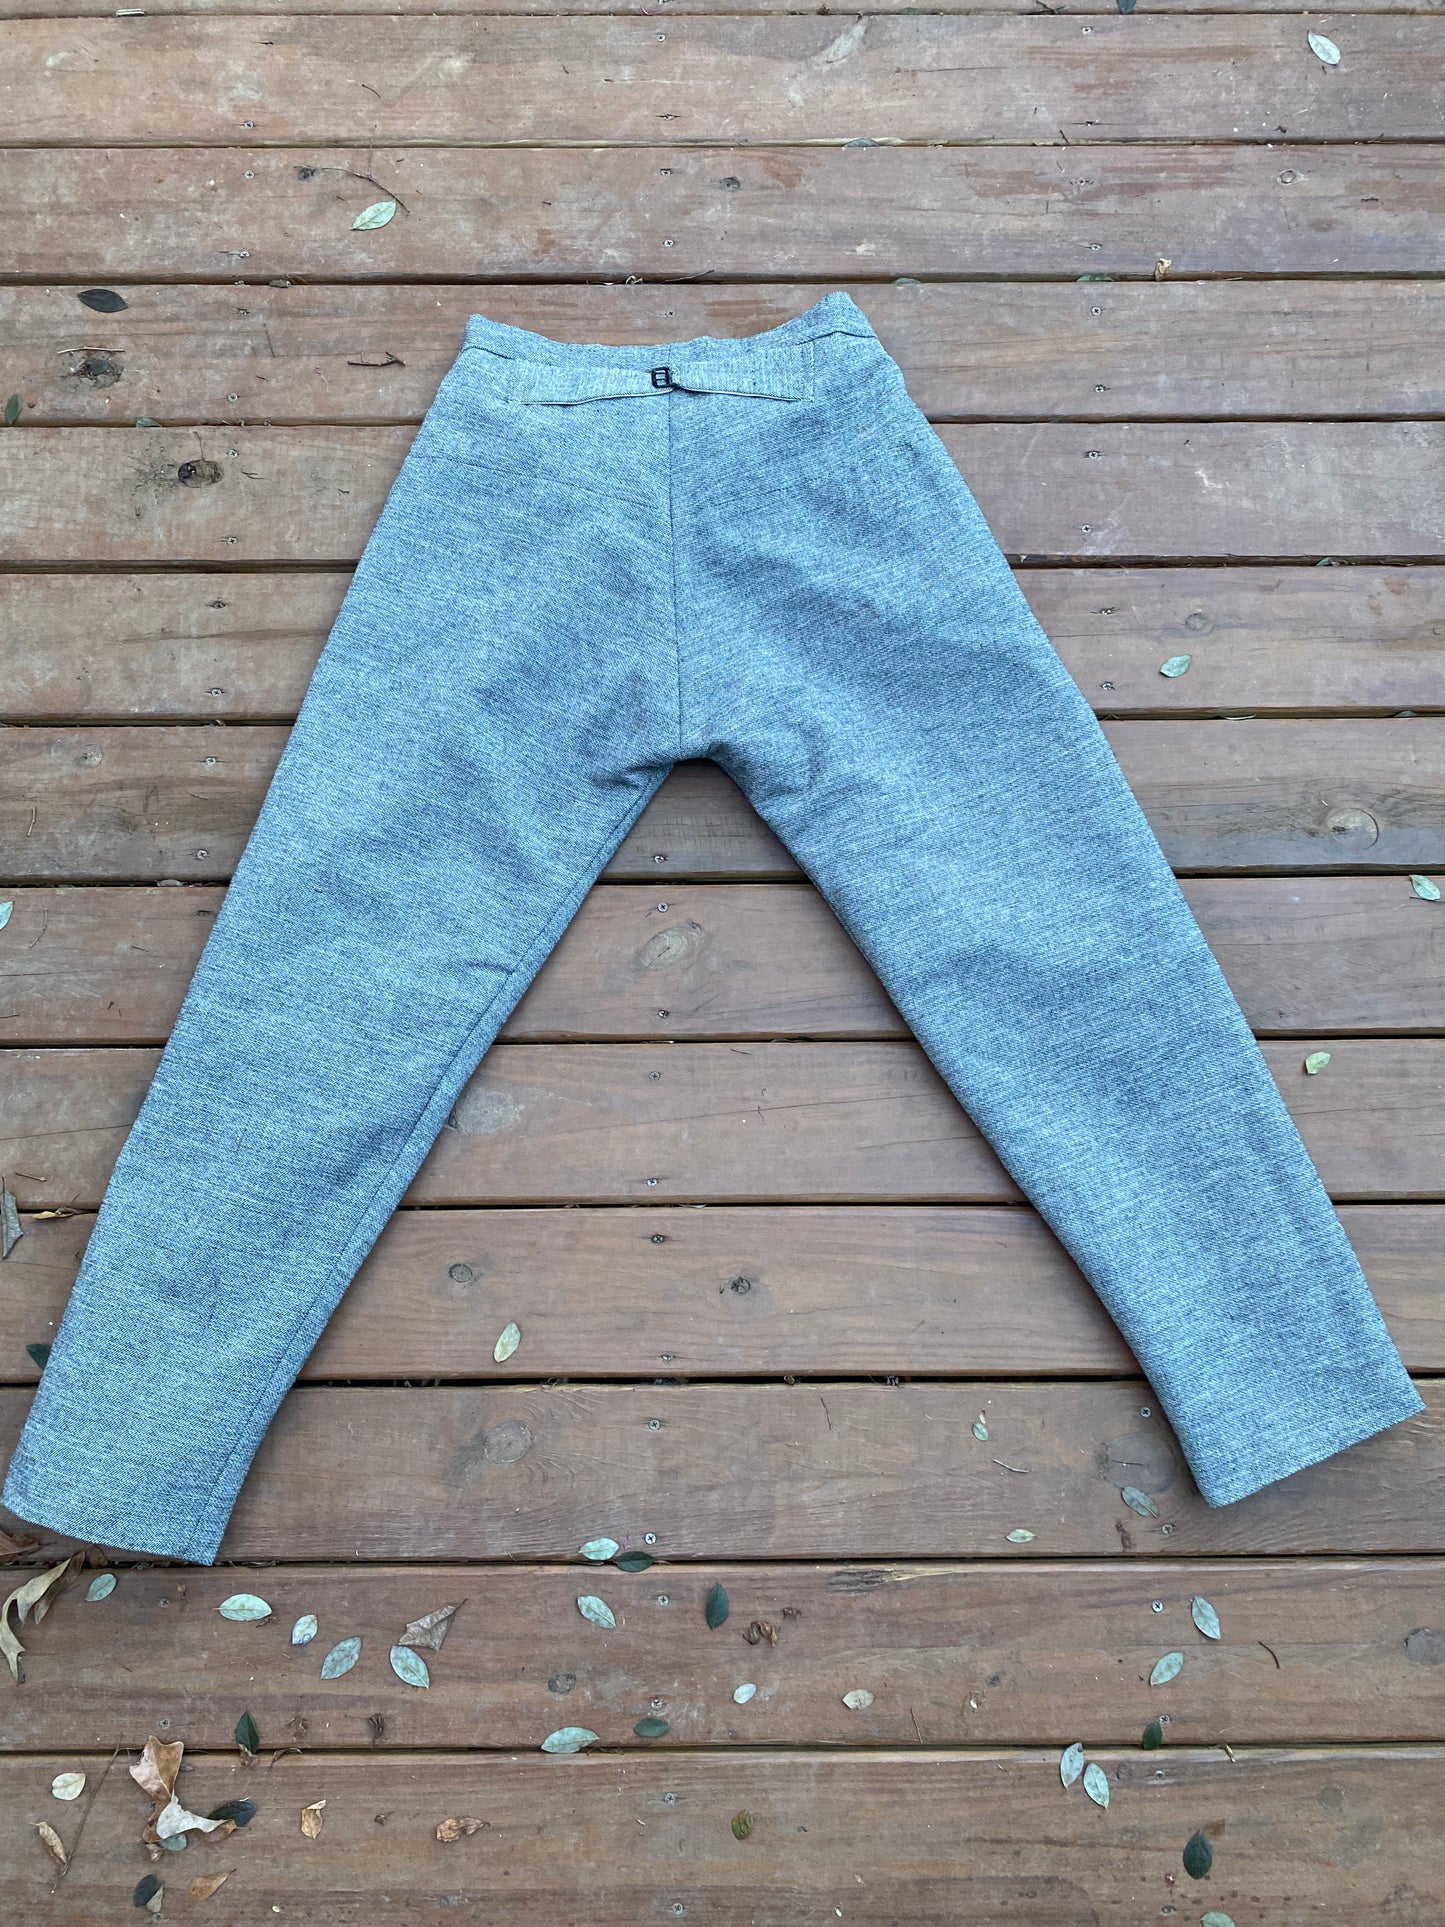 North Carolina State Issue Trousers